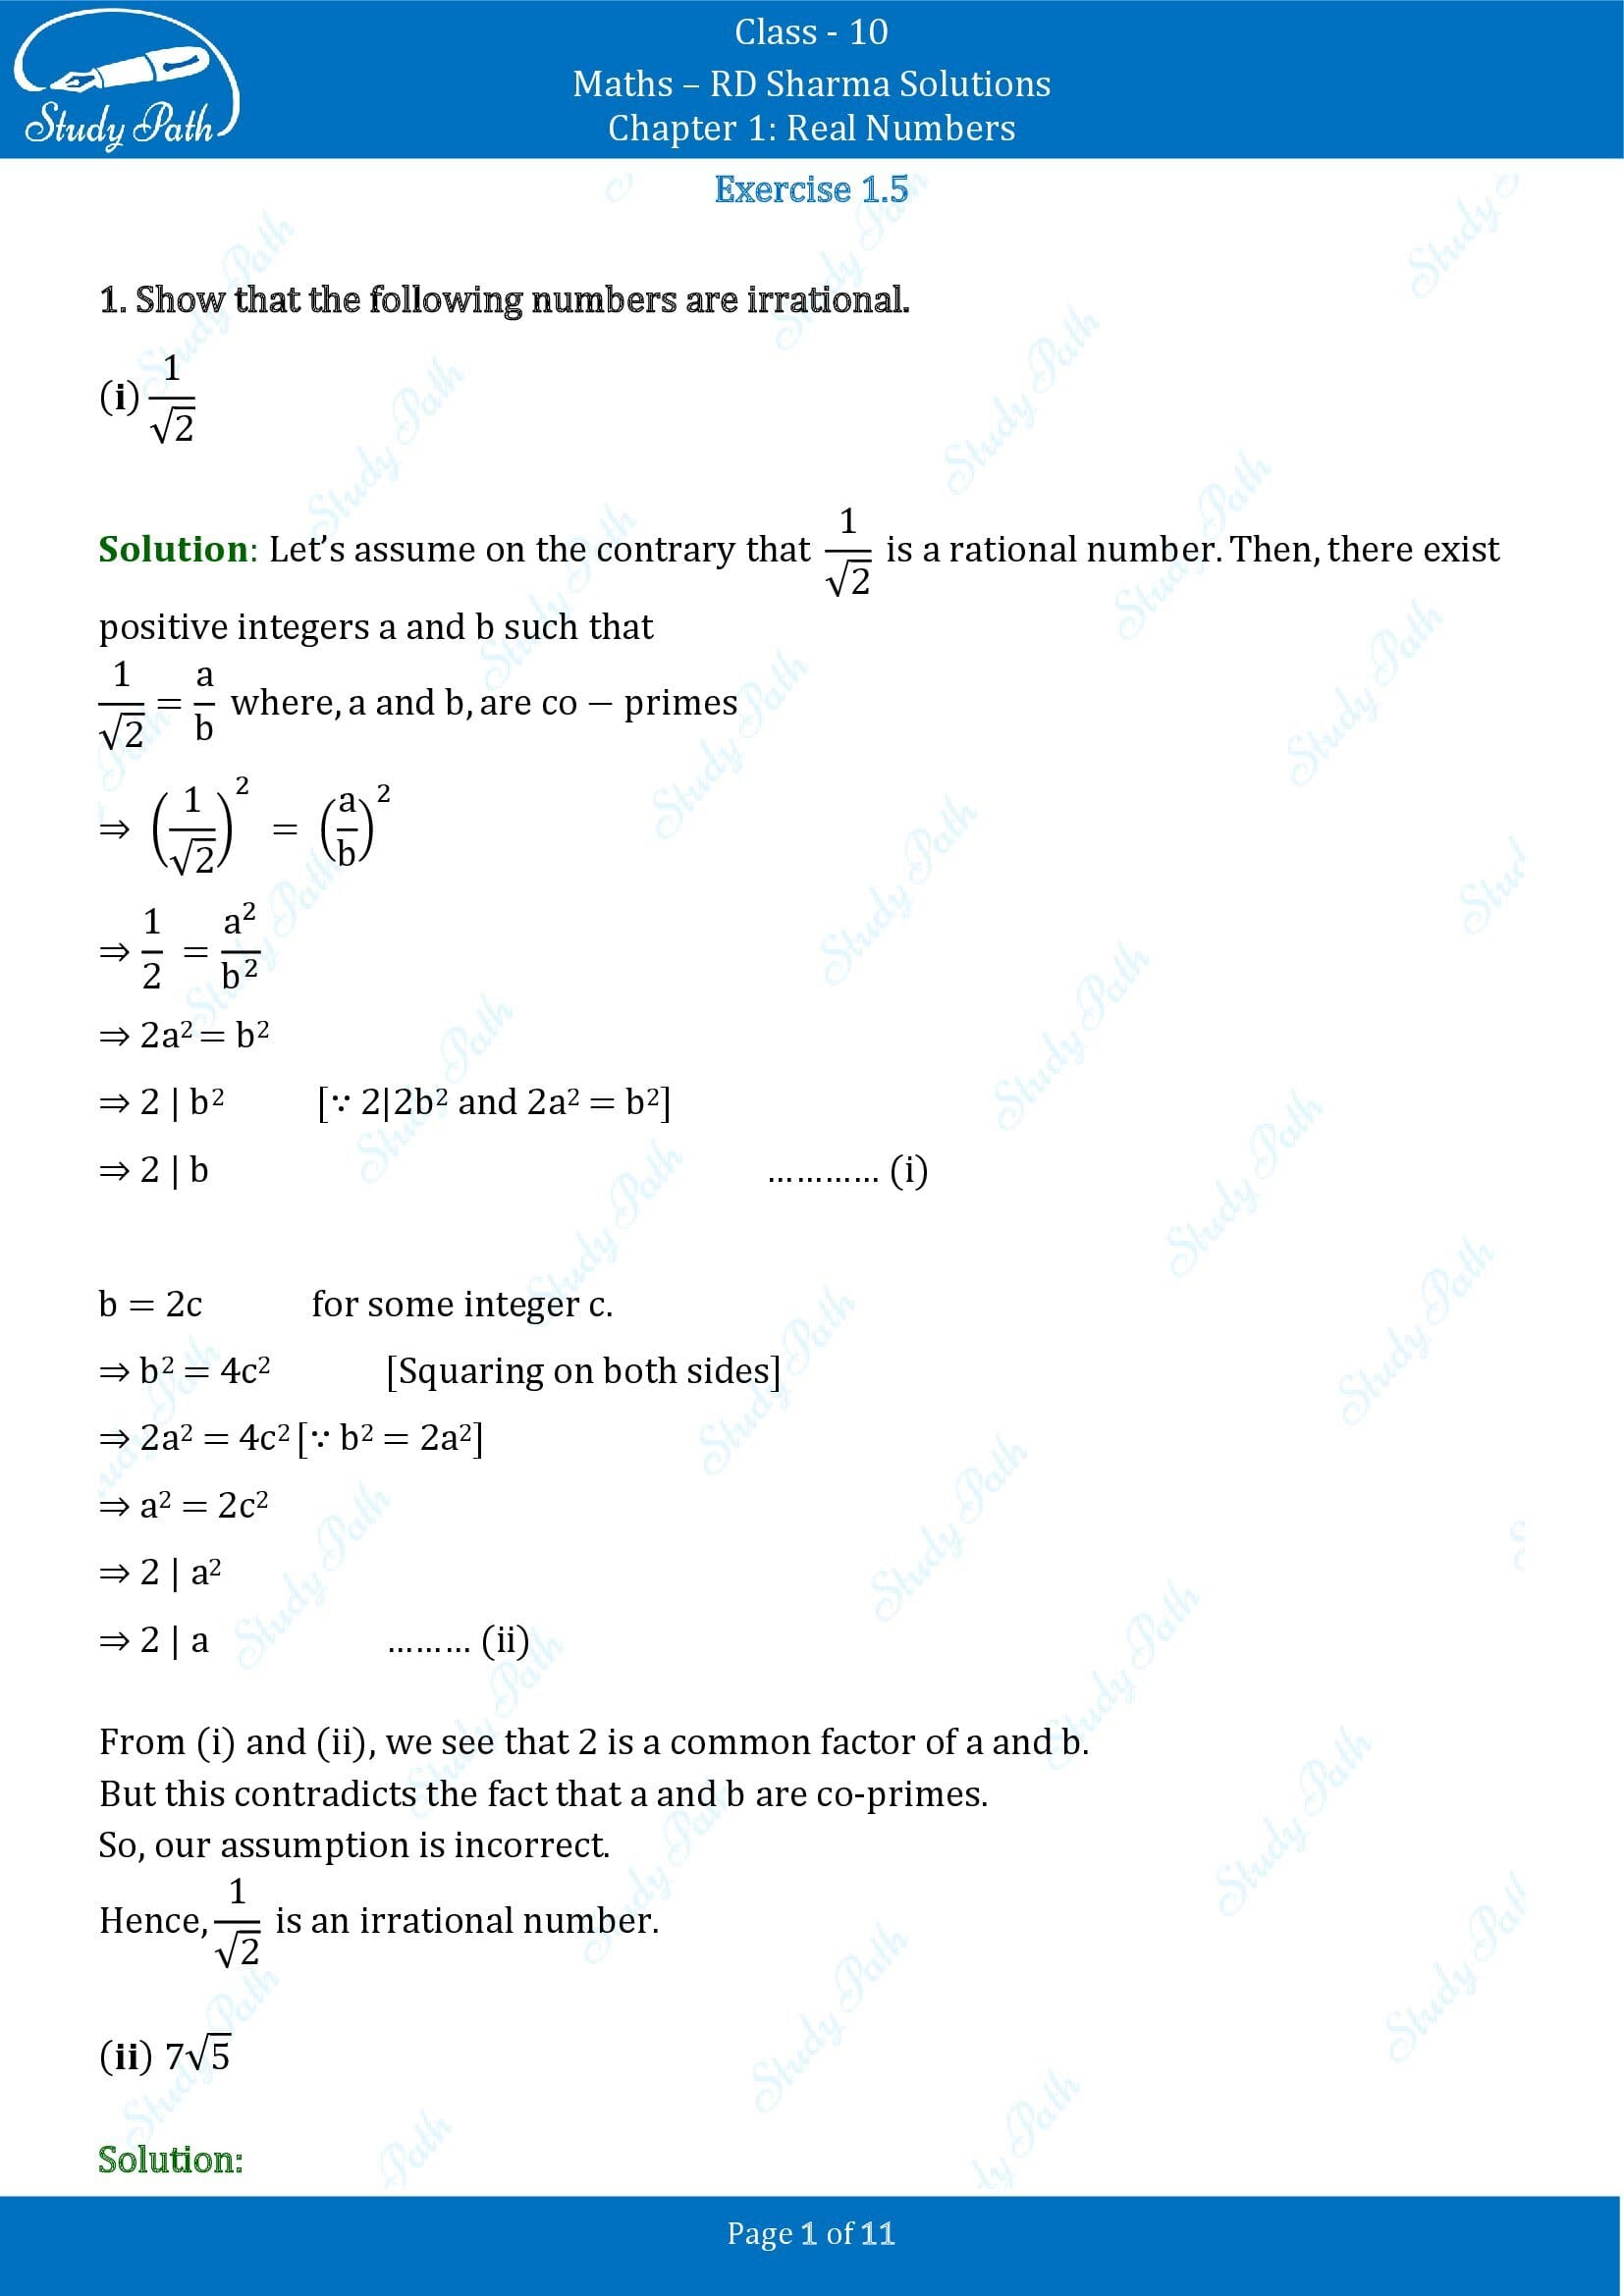 RD Sharma Solutions Class 10 Chapter 1 Real Numbers Exercise 1.5 00001